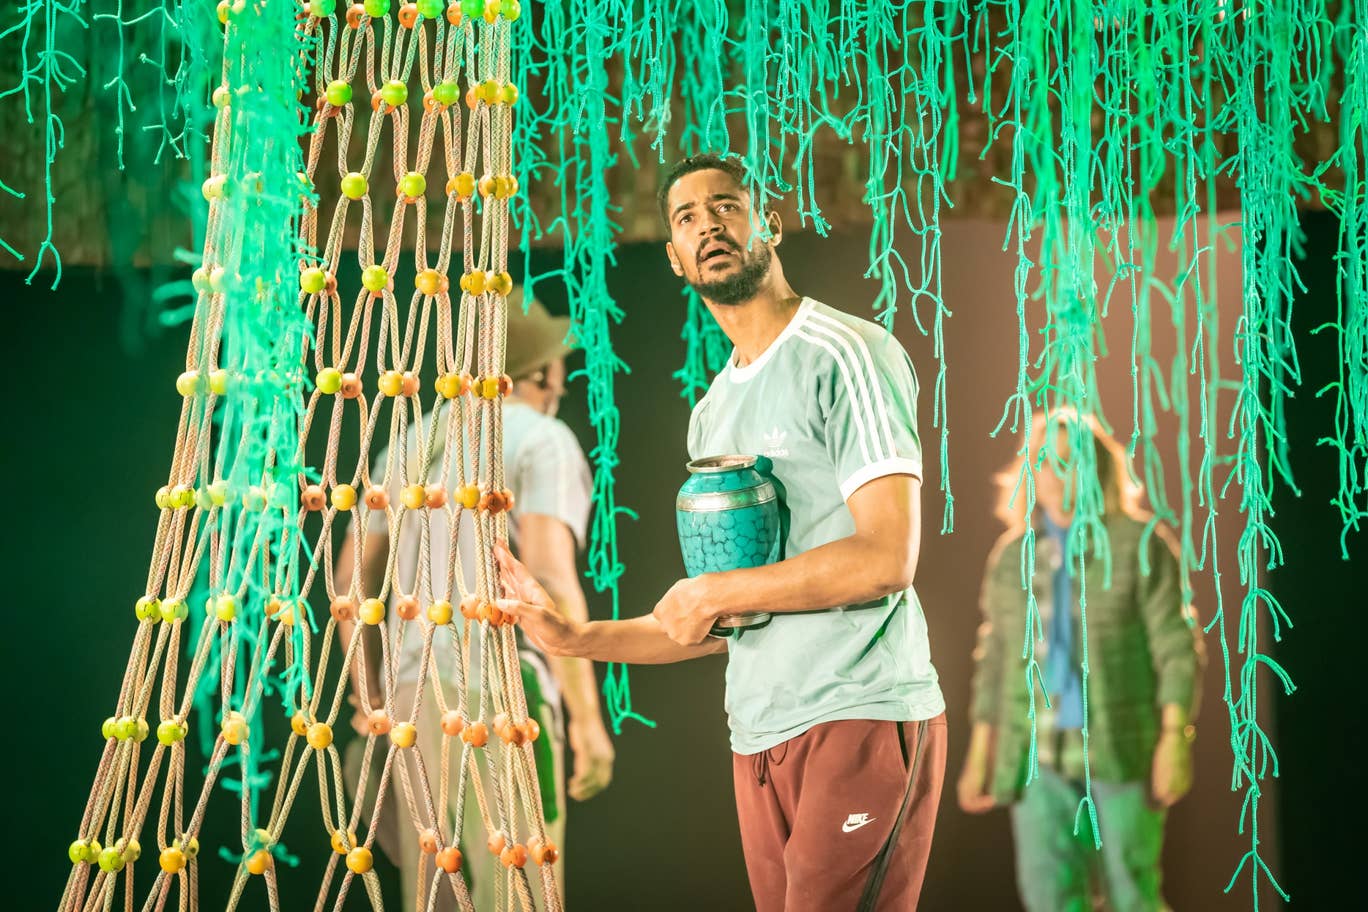 Alfred Enoch is pictured in a still from the play “Tree”.